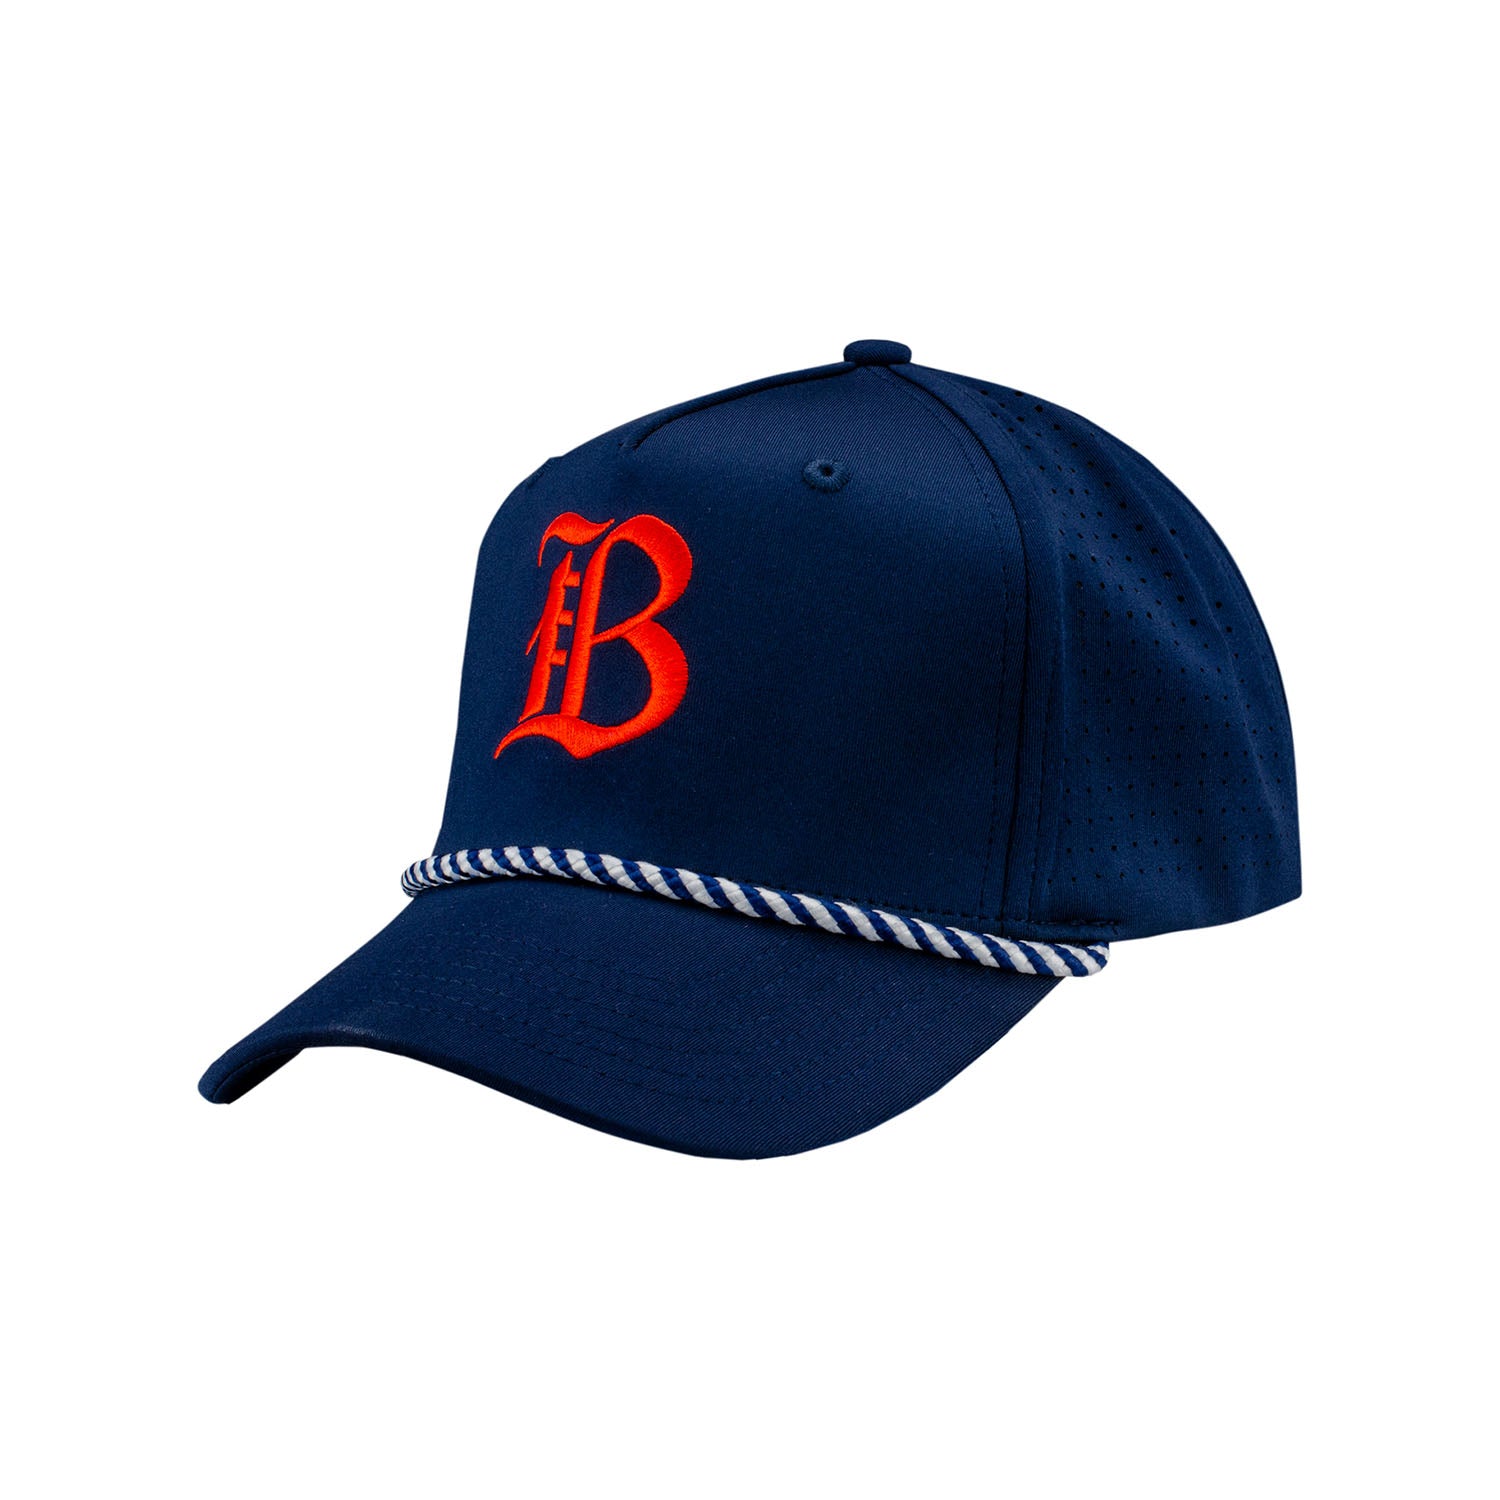 Adult Die Hard Bay FC Vented Navy Hat - Angled Left Side View